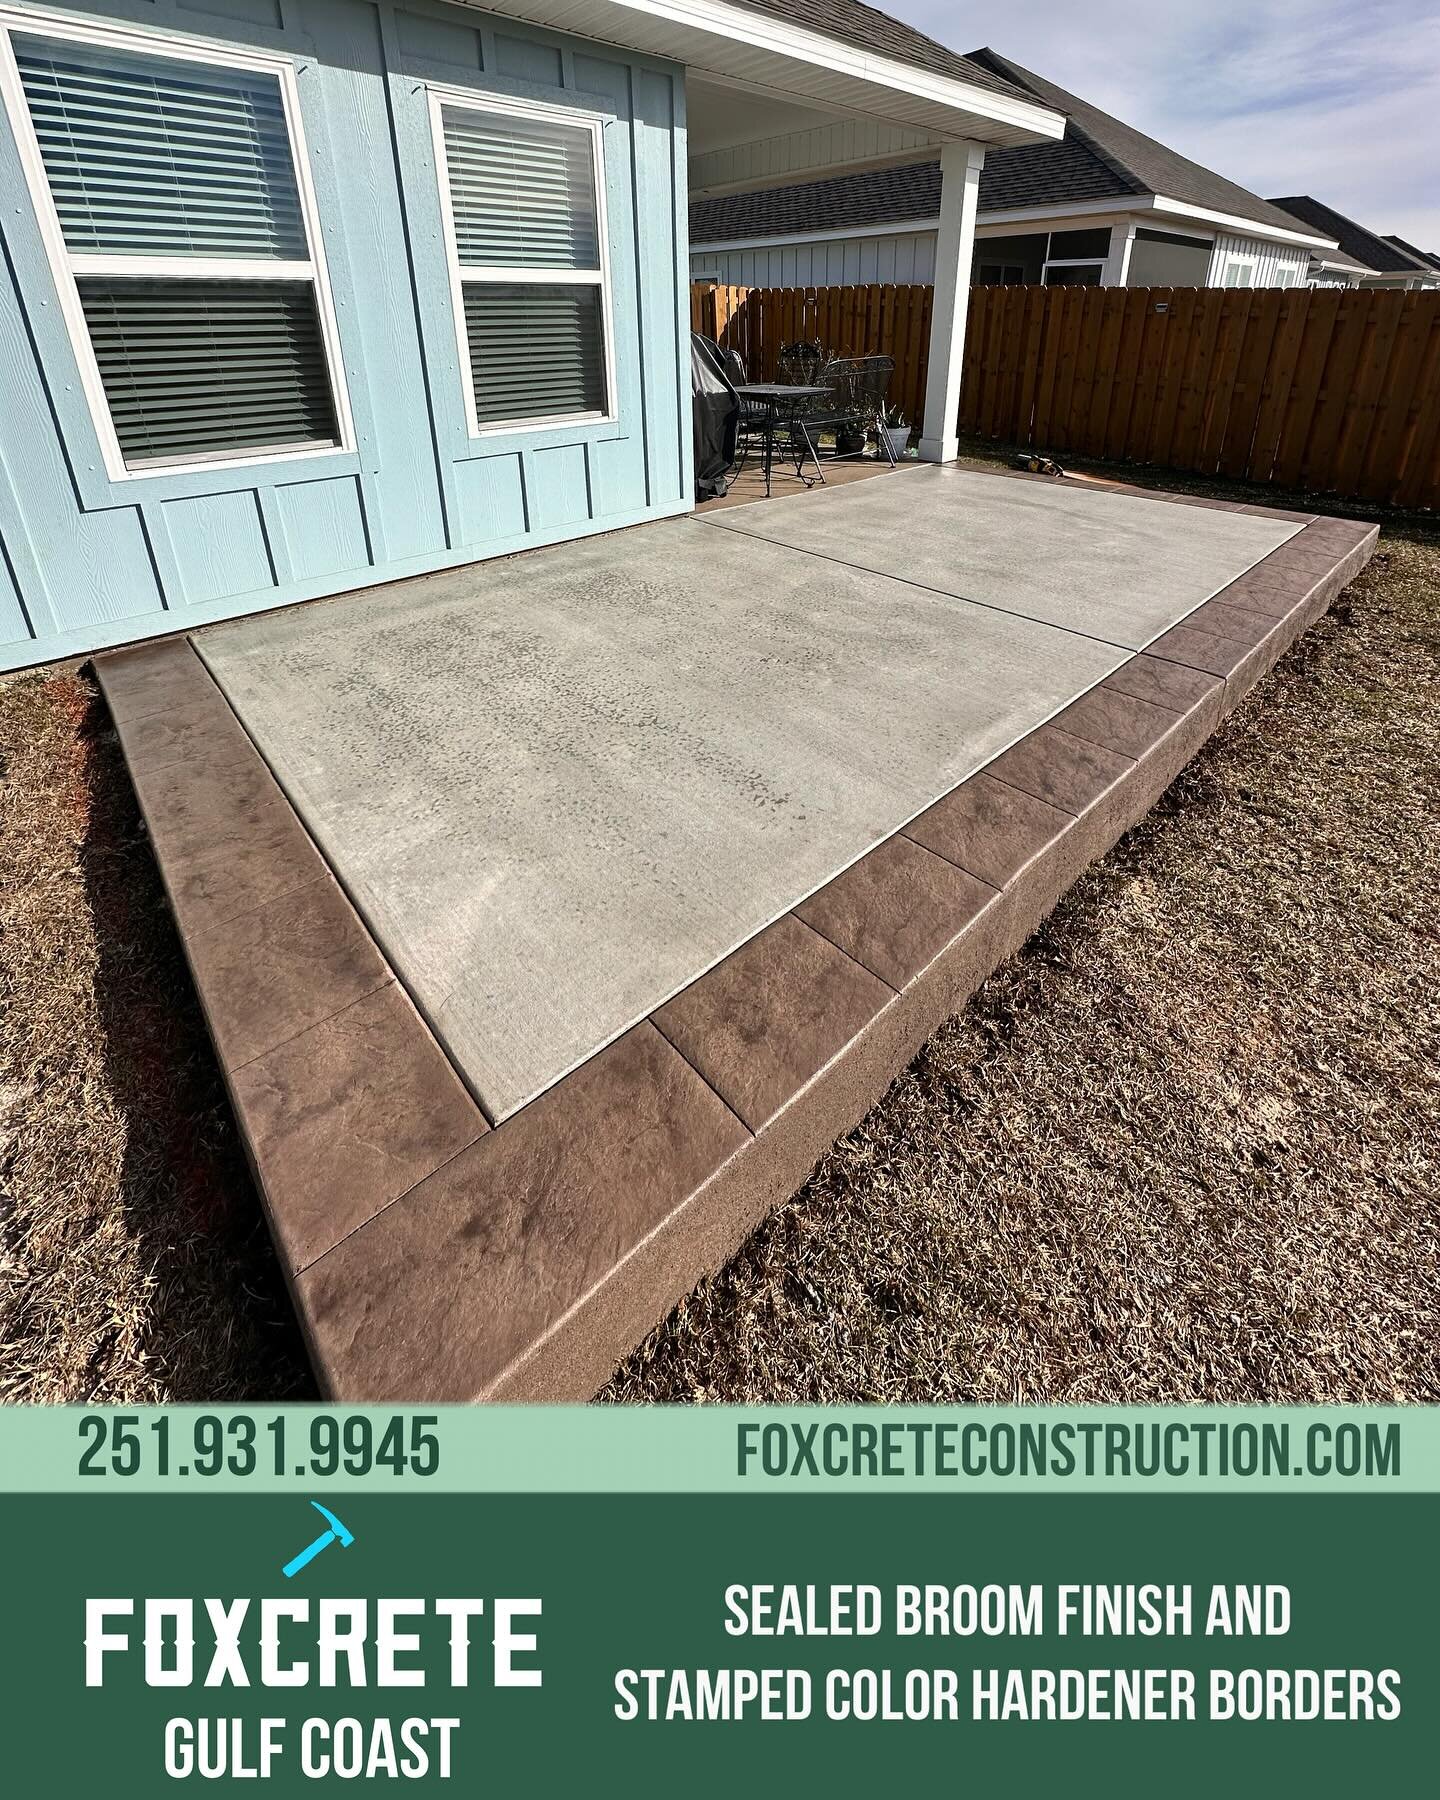 Clean and simple for the win on this back patio! 🦊 
#foxcrete #concrete #custom #patio